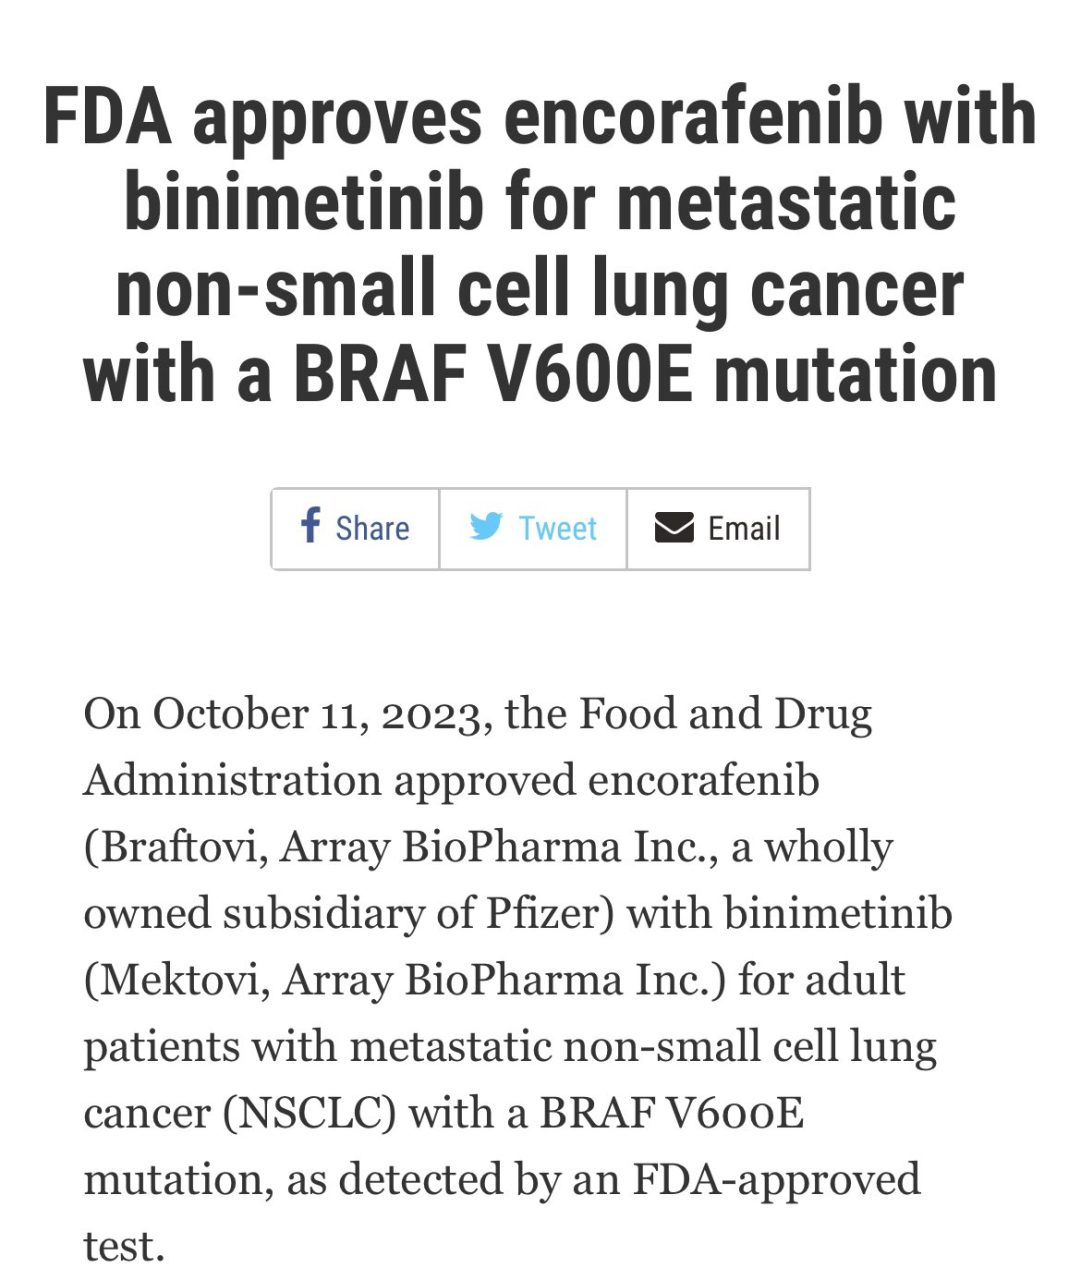 Rami Manochakian: FDA Oncology approves the combination of Encorafenib and Binimetinib for Patients with metastatic Non-Small cell Lung Cancer with a BRAF V600E mutation.